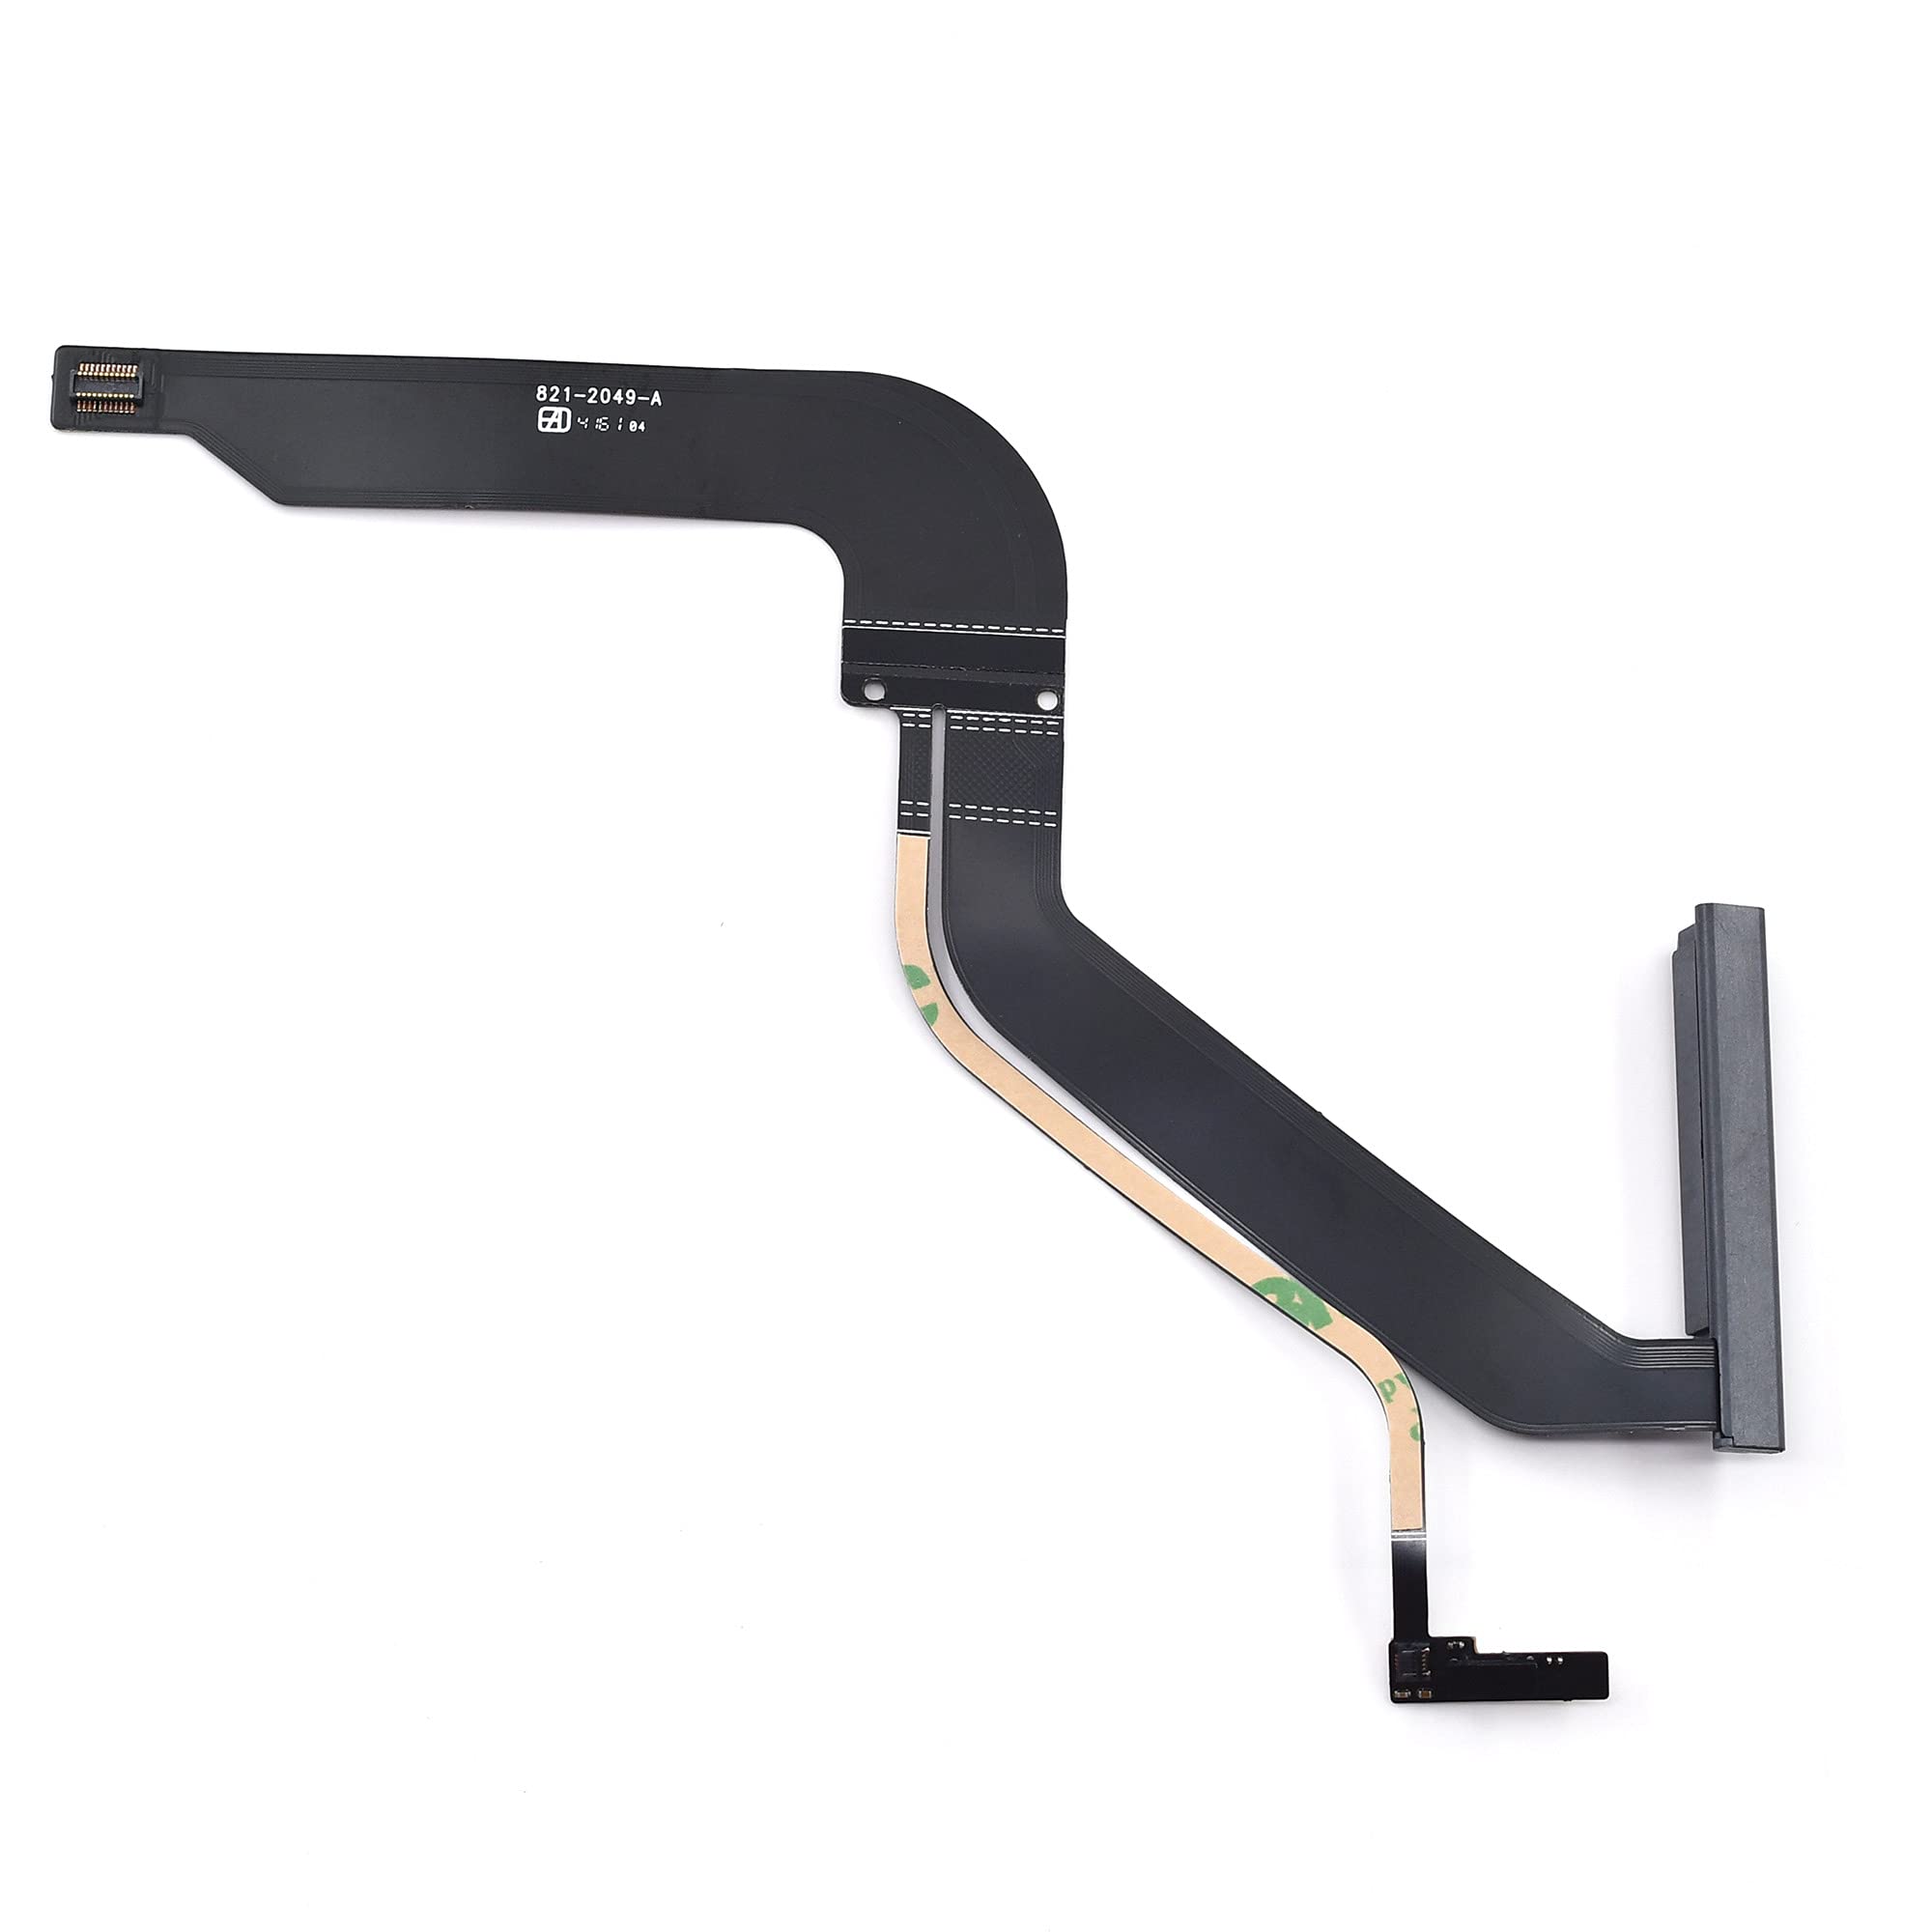 Book Cover PC-Mart. New 821-2049-A HDD Hard Drive Cable for Apple MacBook Pro 13 inch A1278 Mid 2012 Year MD101 MD102 Laptop HDD Hard Drive Cable 821-2049-A